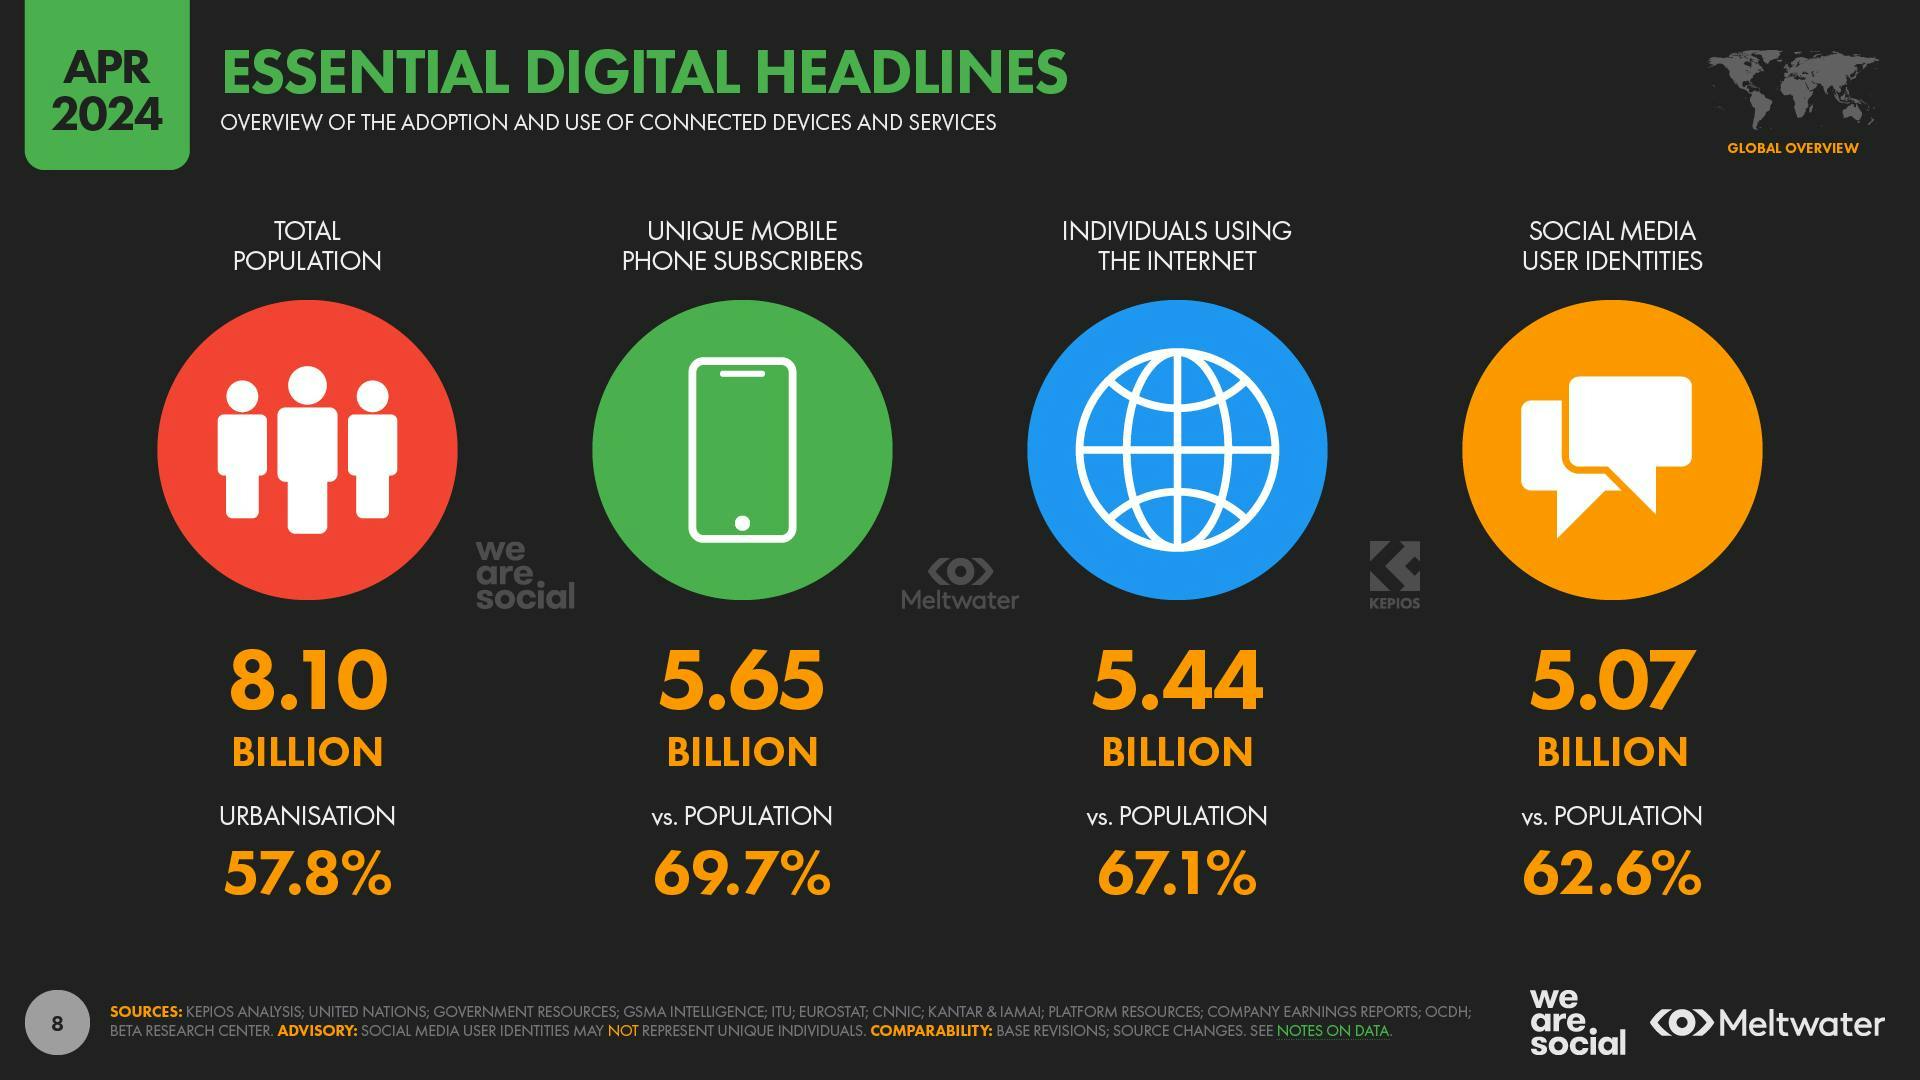 Essential digital headlines chart showing the statistics metioned in the paragraph above.